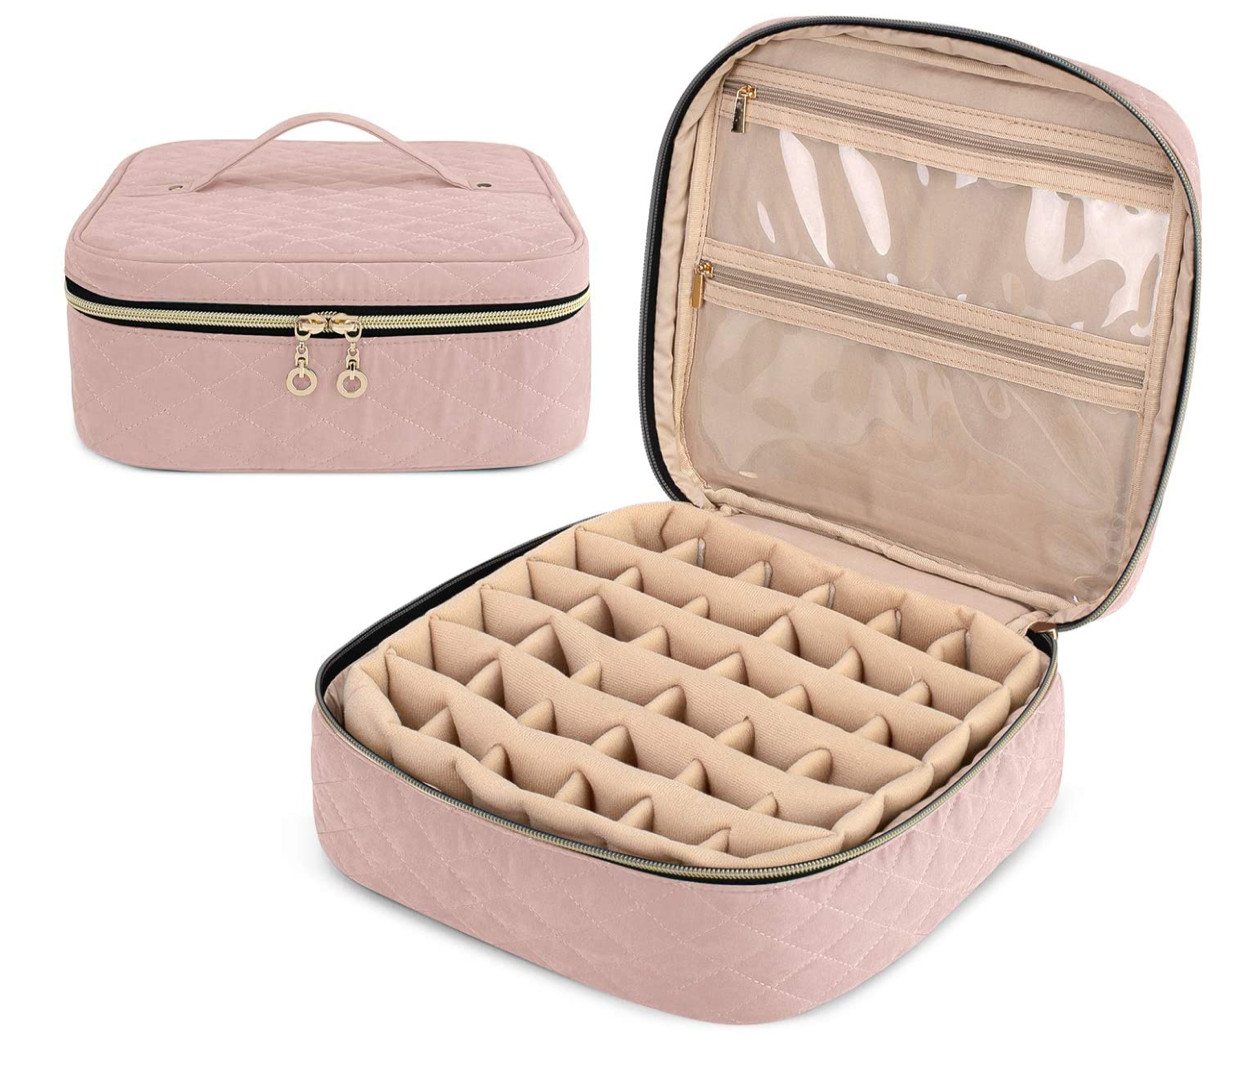 Essential Oil Carry Case (Holds 36 Bottles)